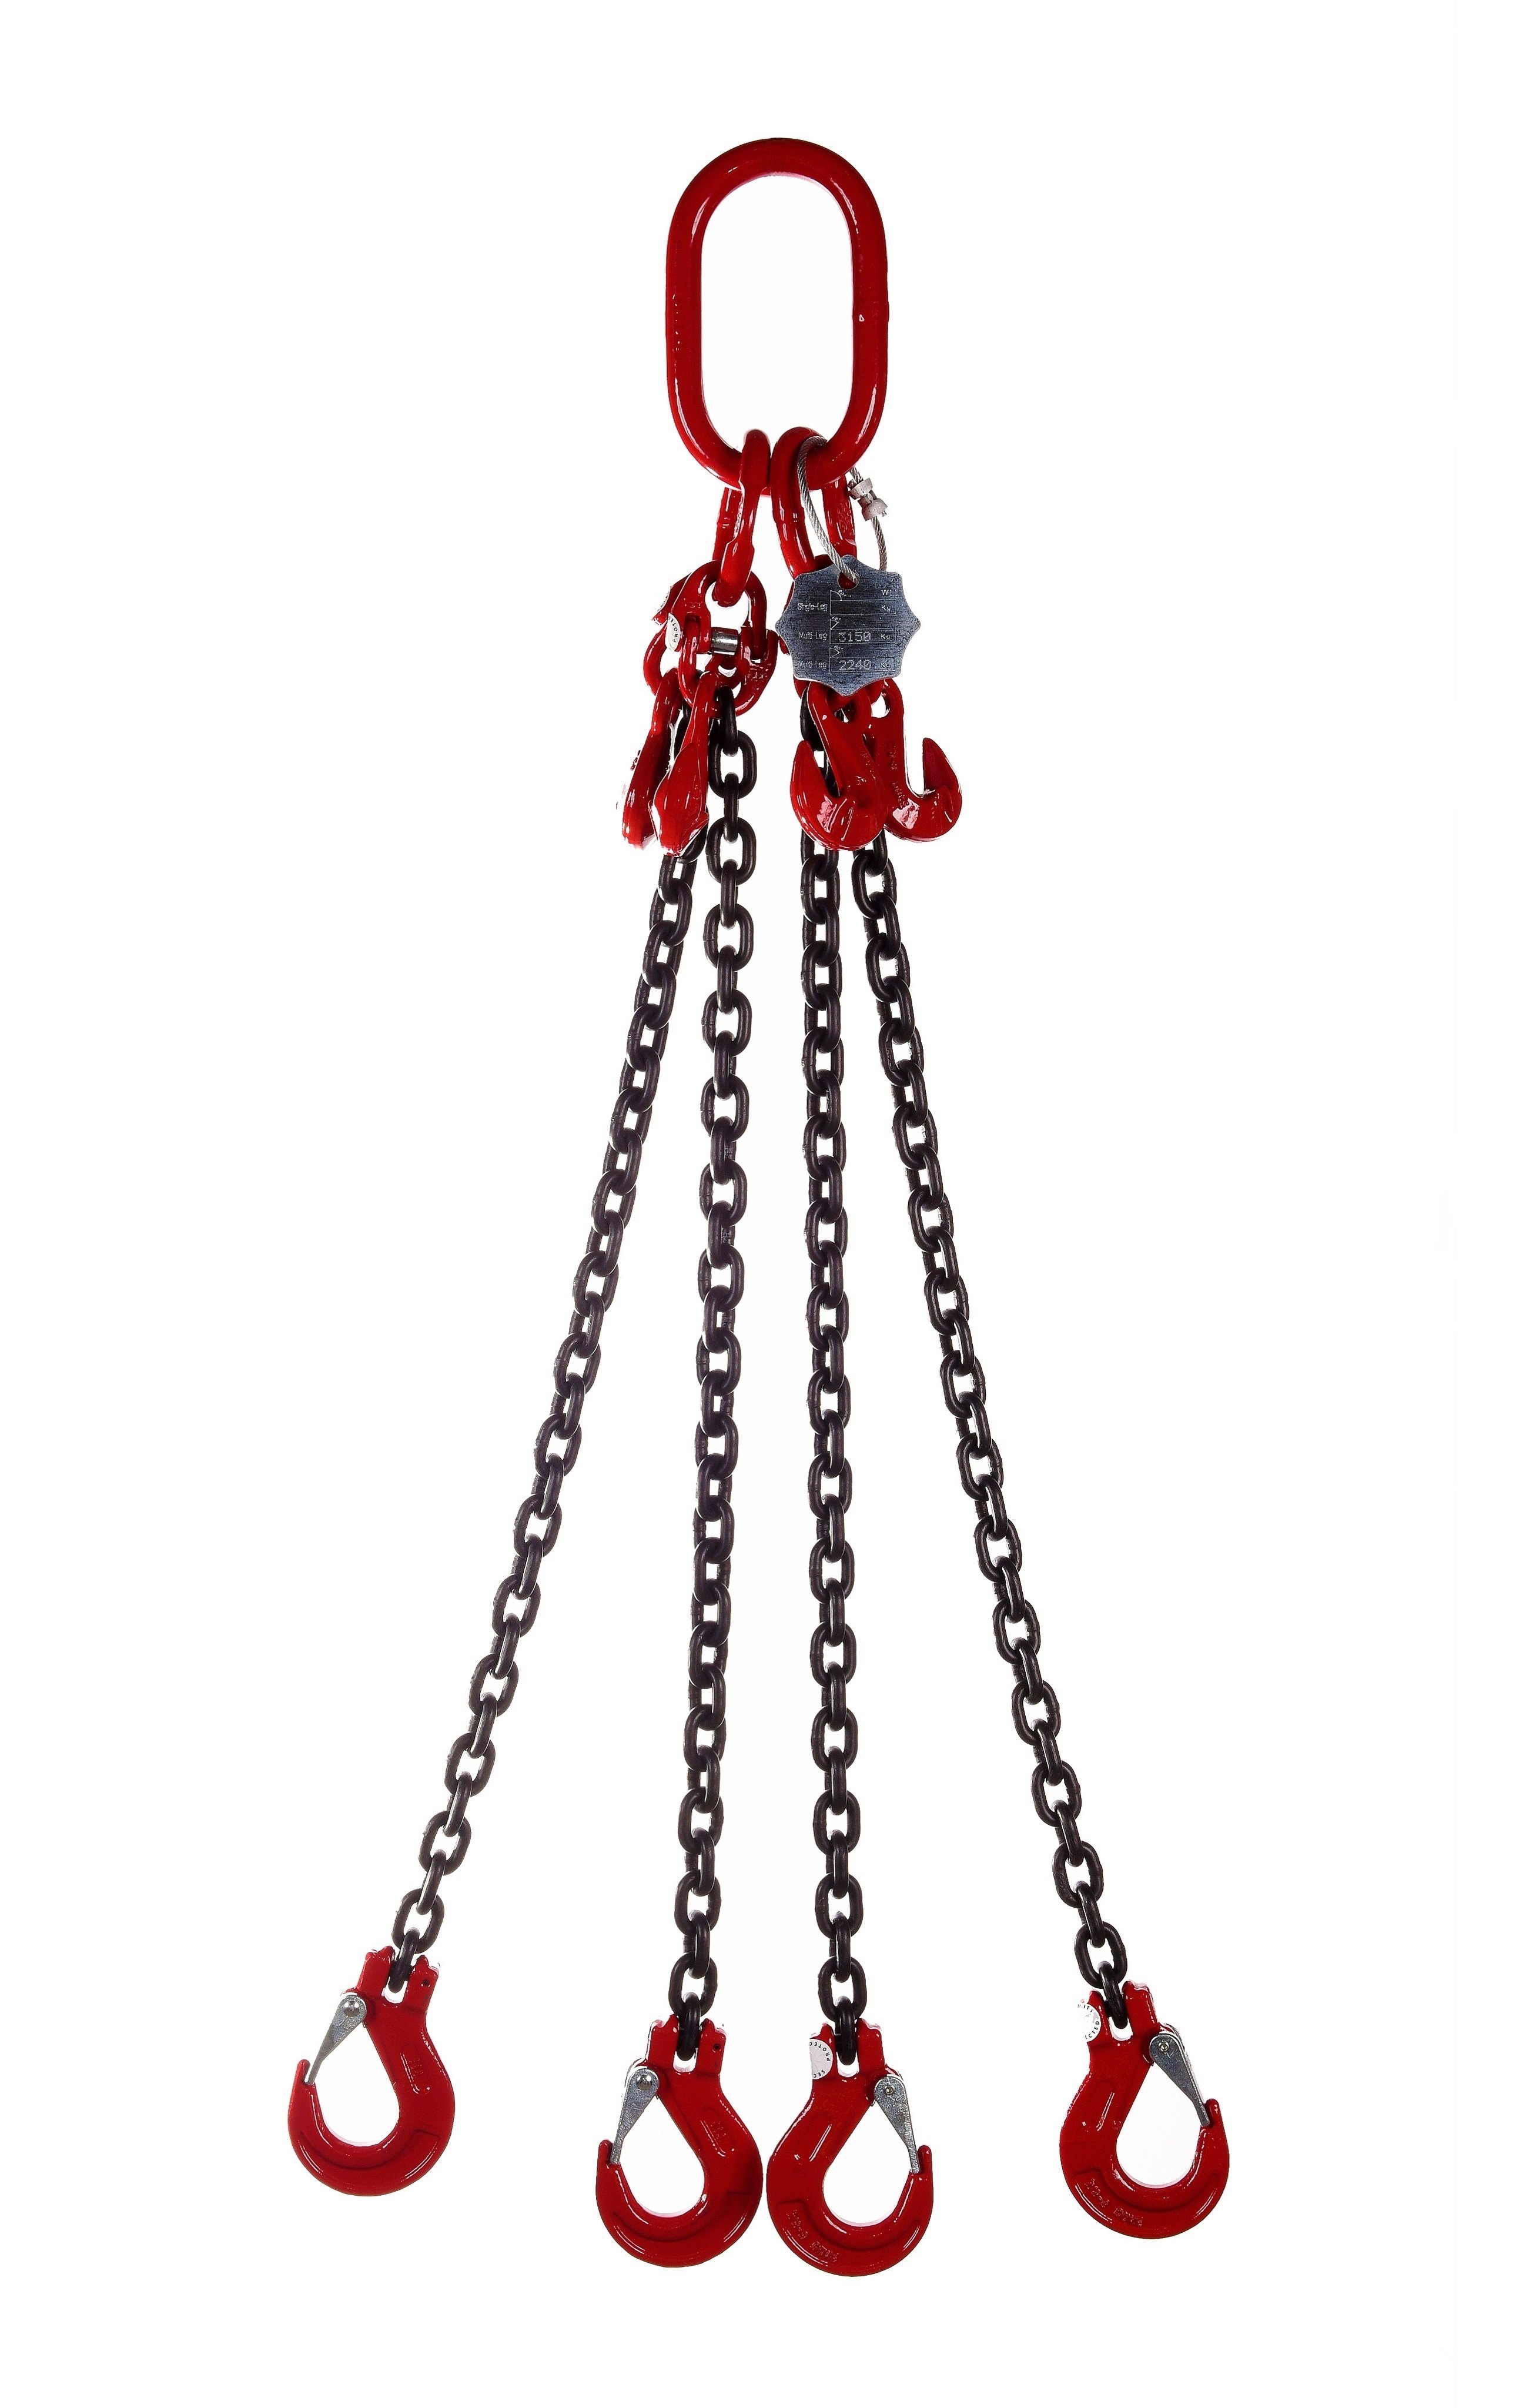 4 Leg 11.2tonne 13mm Lifting Chain Sling with choice of length and hooks – Without Shortening Hook – 6mtr – Clevis Safety Hook – Chain Slings – WSB